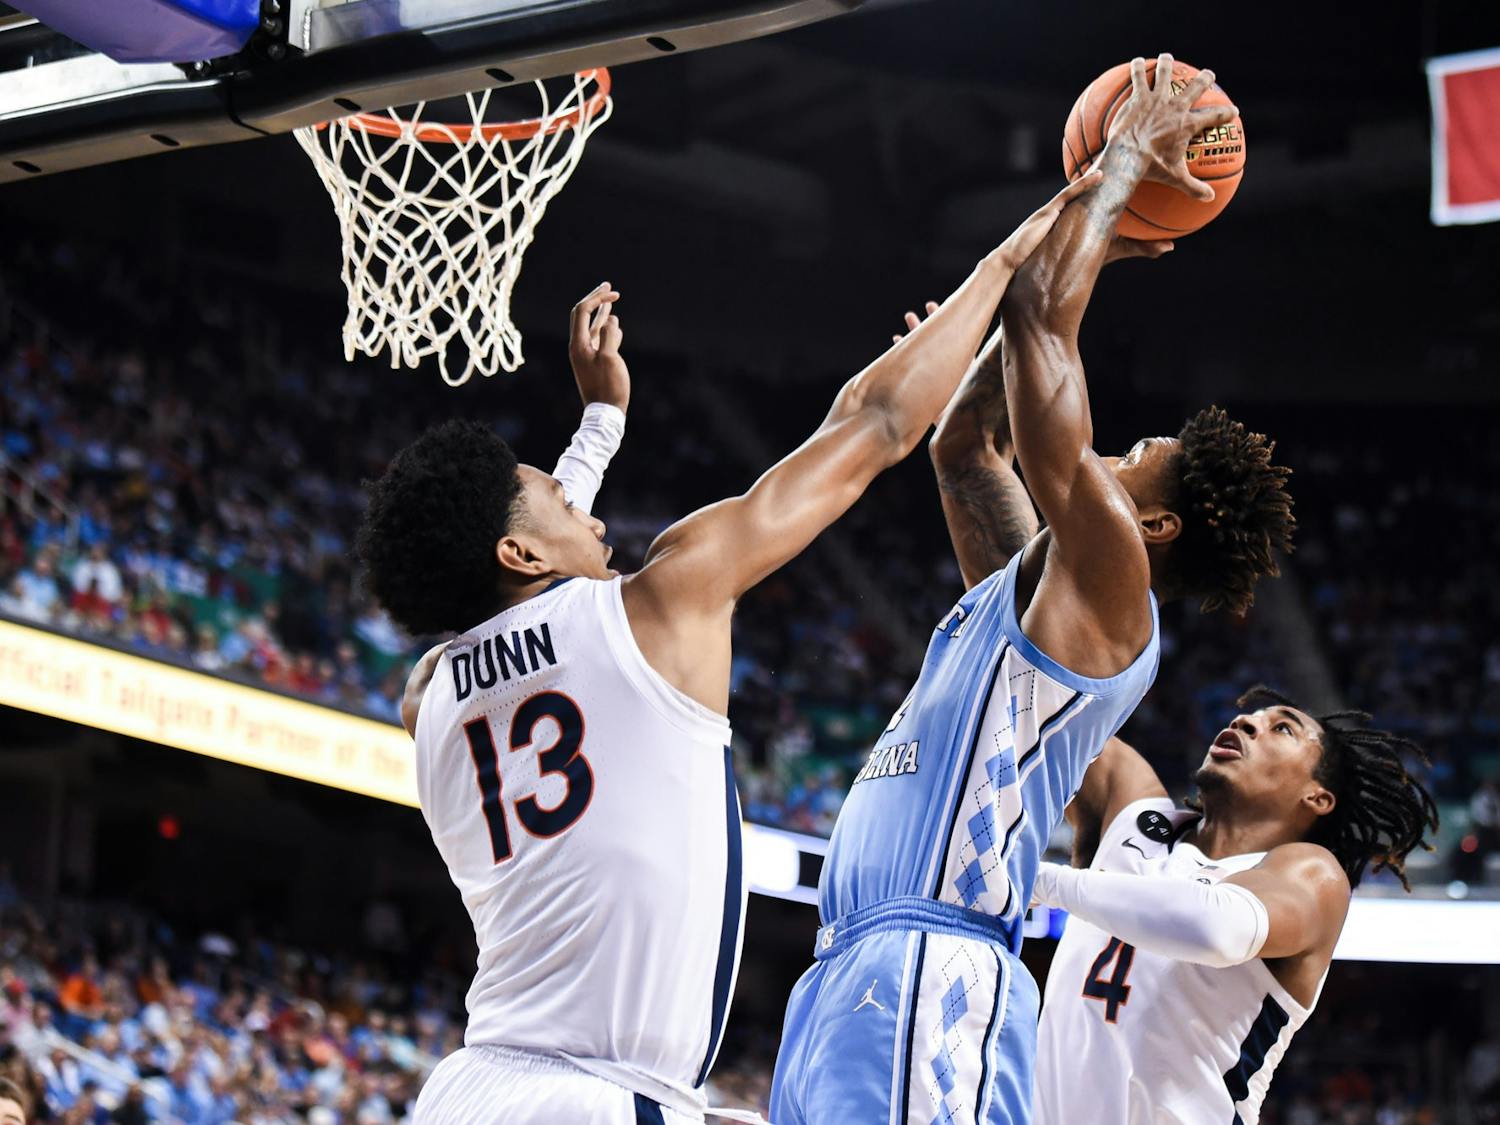 UNC graduate forward Leaky Black (1) goes for a dunk during the game against Virginia in the ACC Tournament Quarterfinals at Greensboro Coliseum on March 9, 2023. UNC fell to Virginia 68-59.